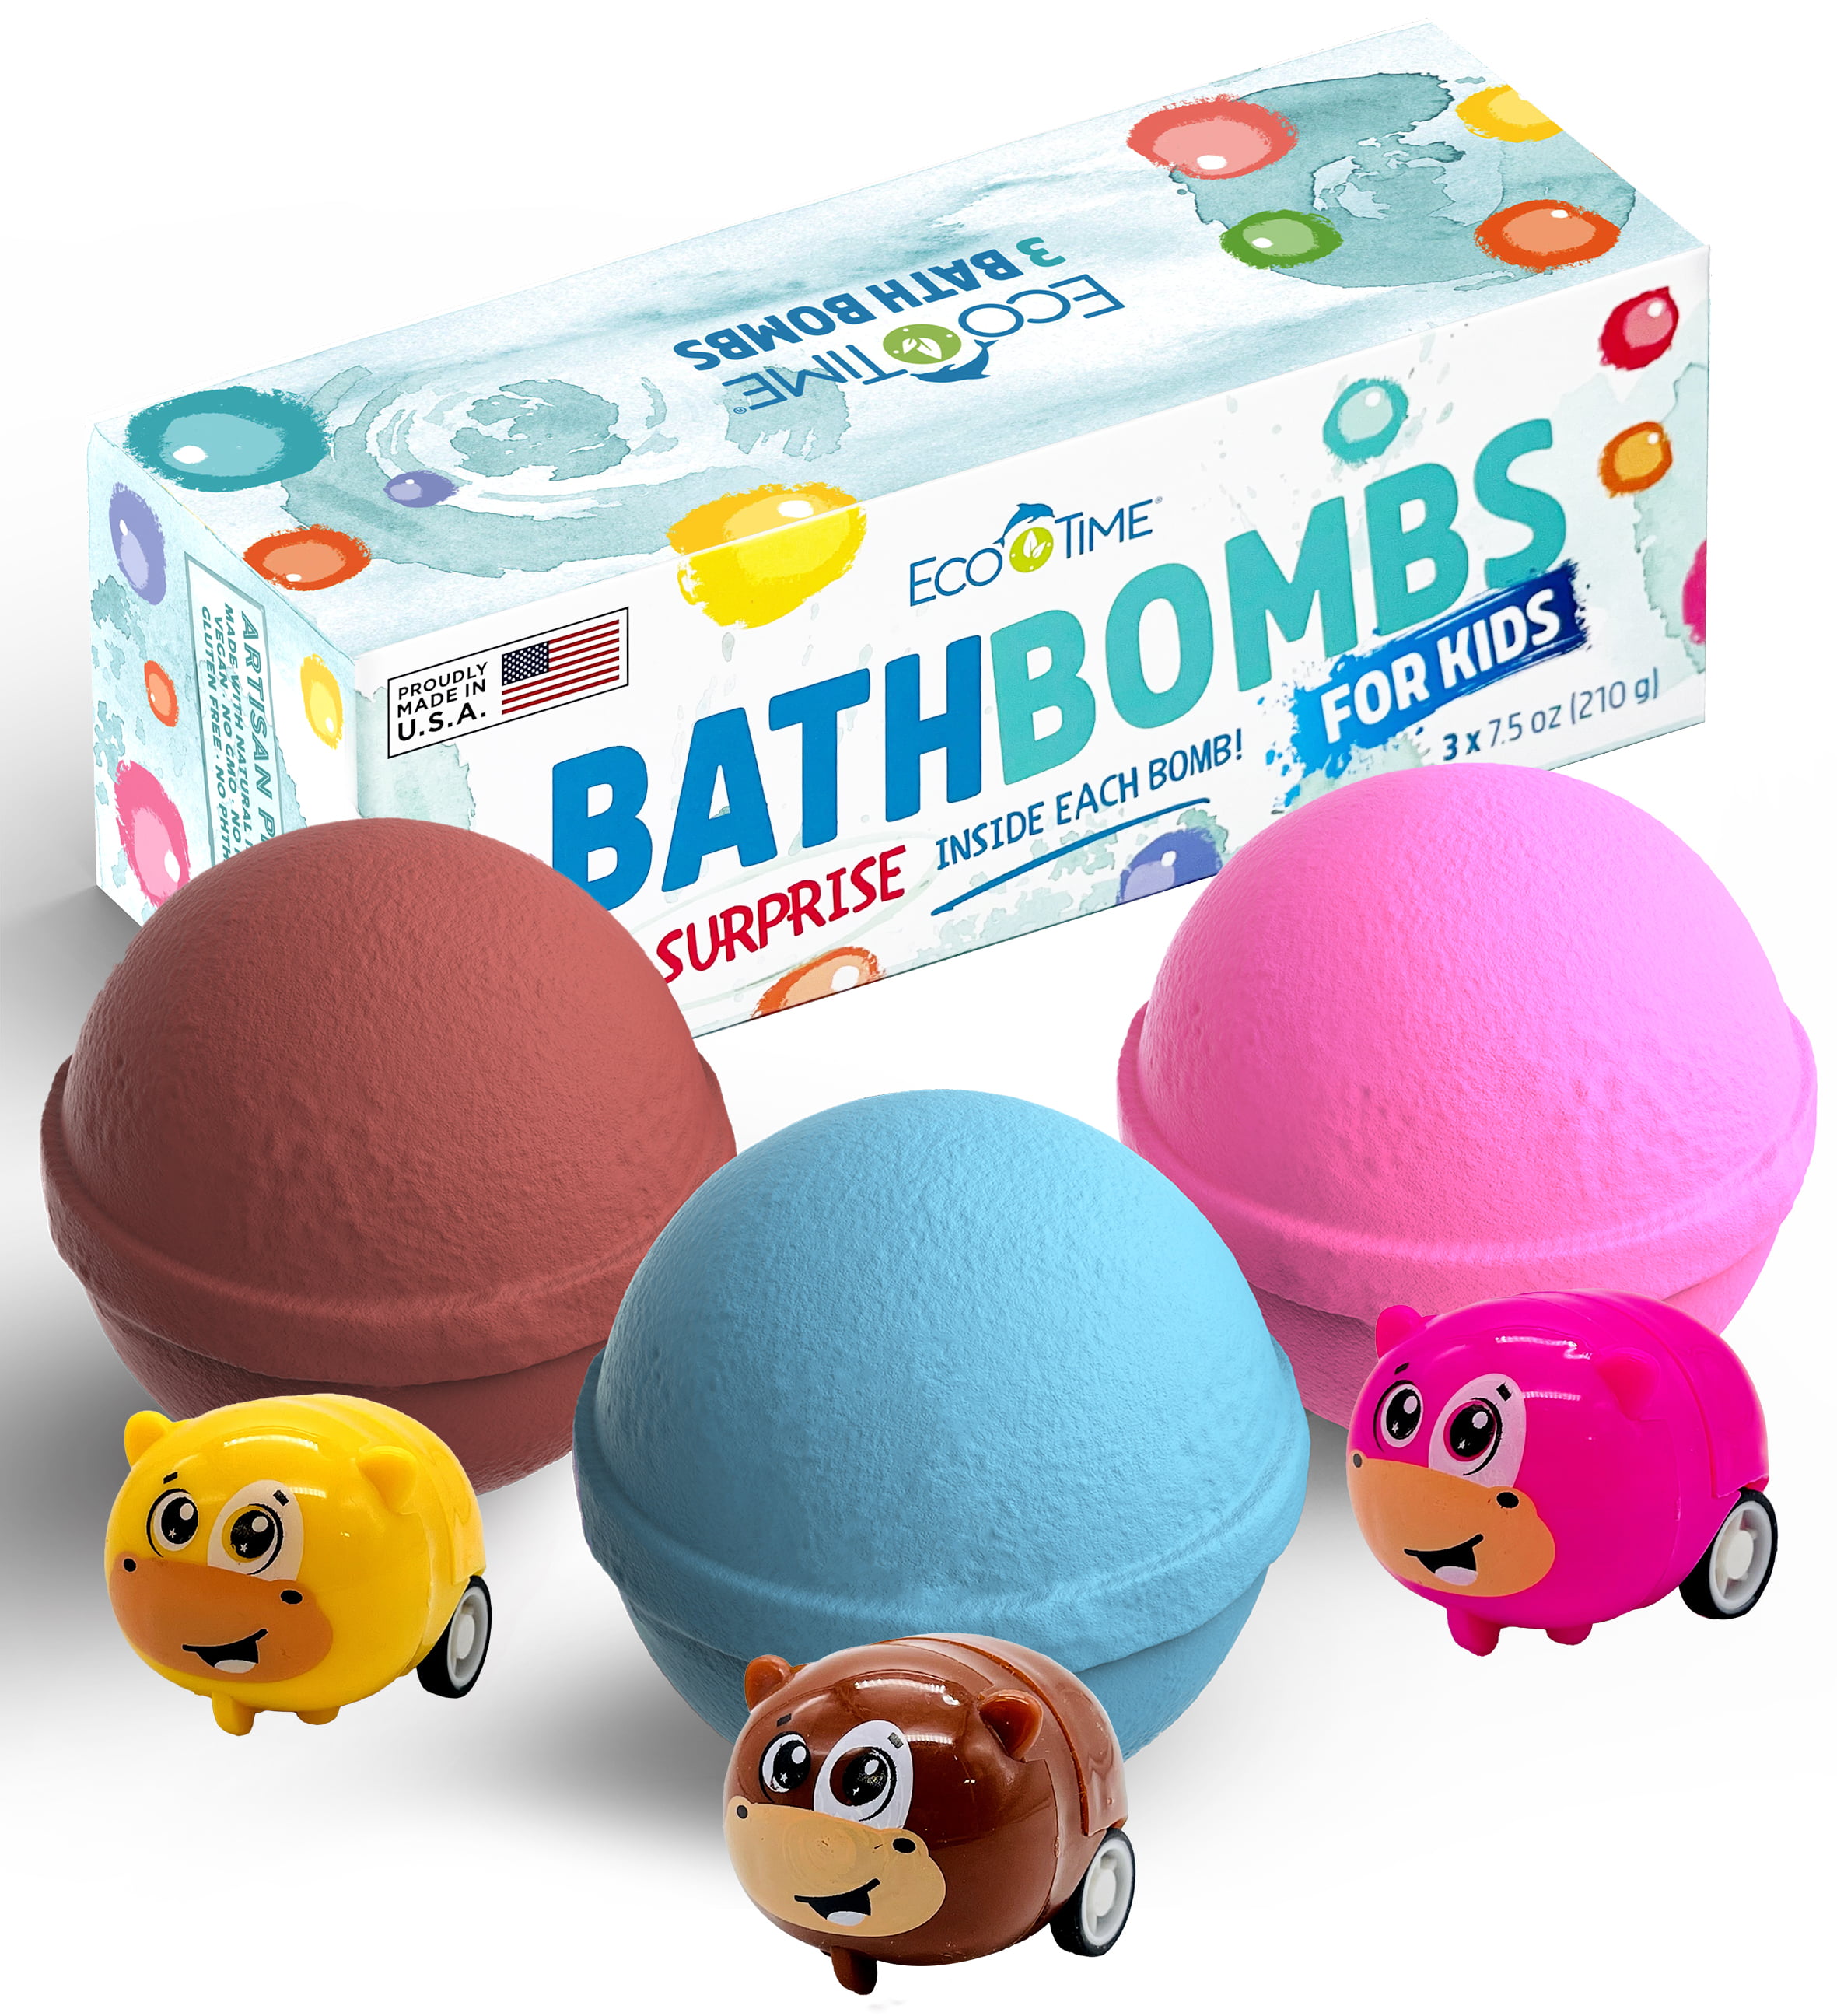 Honeysticks Bath Color Tablets for Kids - Non Toxic Bathtub Color Drops  Made with Natural and Food Grade Ingredients - Fragrance Free - Fizzy,  Brightly Colored Bathtime Fun, Great Gift Idea - 36 Drops